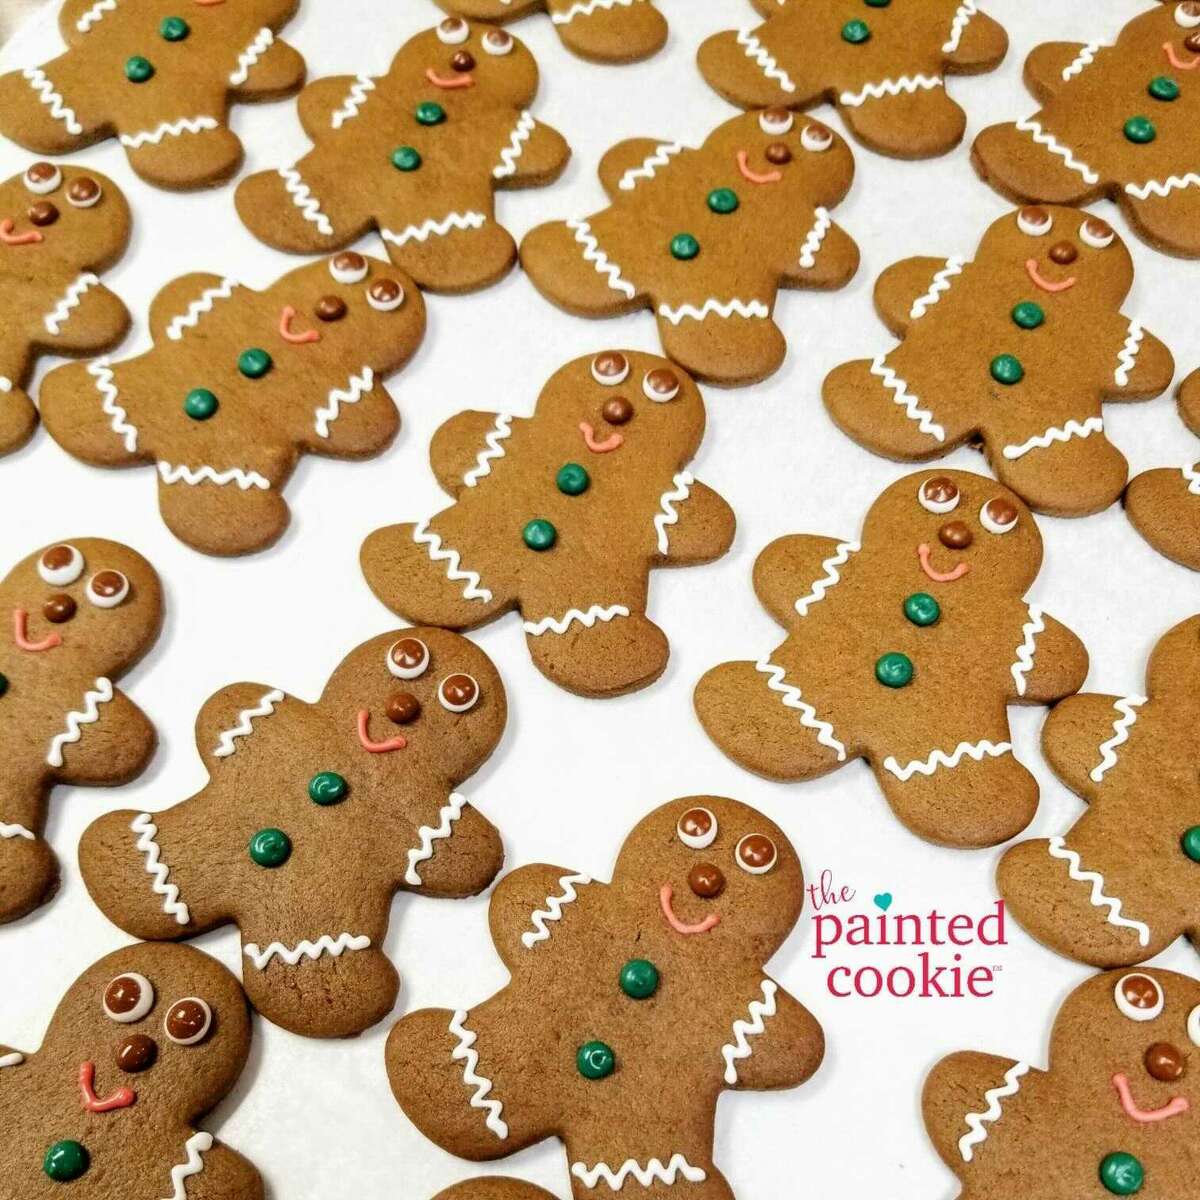 Susan Schmitt, owner of The Painted Cookie in Wilton, Conn., said she was asked to make gingerbread men for the Netflix movie, "The Noel Diary," which has been filming in Connecticut with Justin Hartley and Treat Williams. 